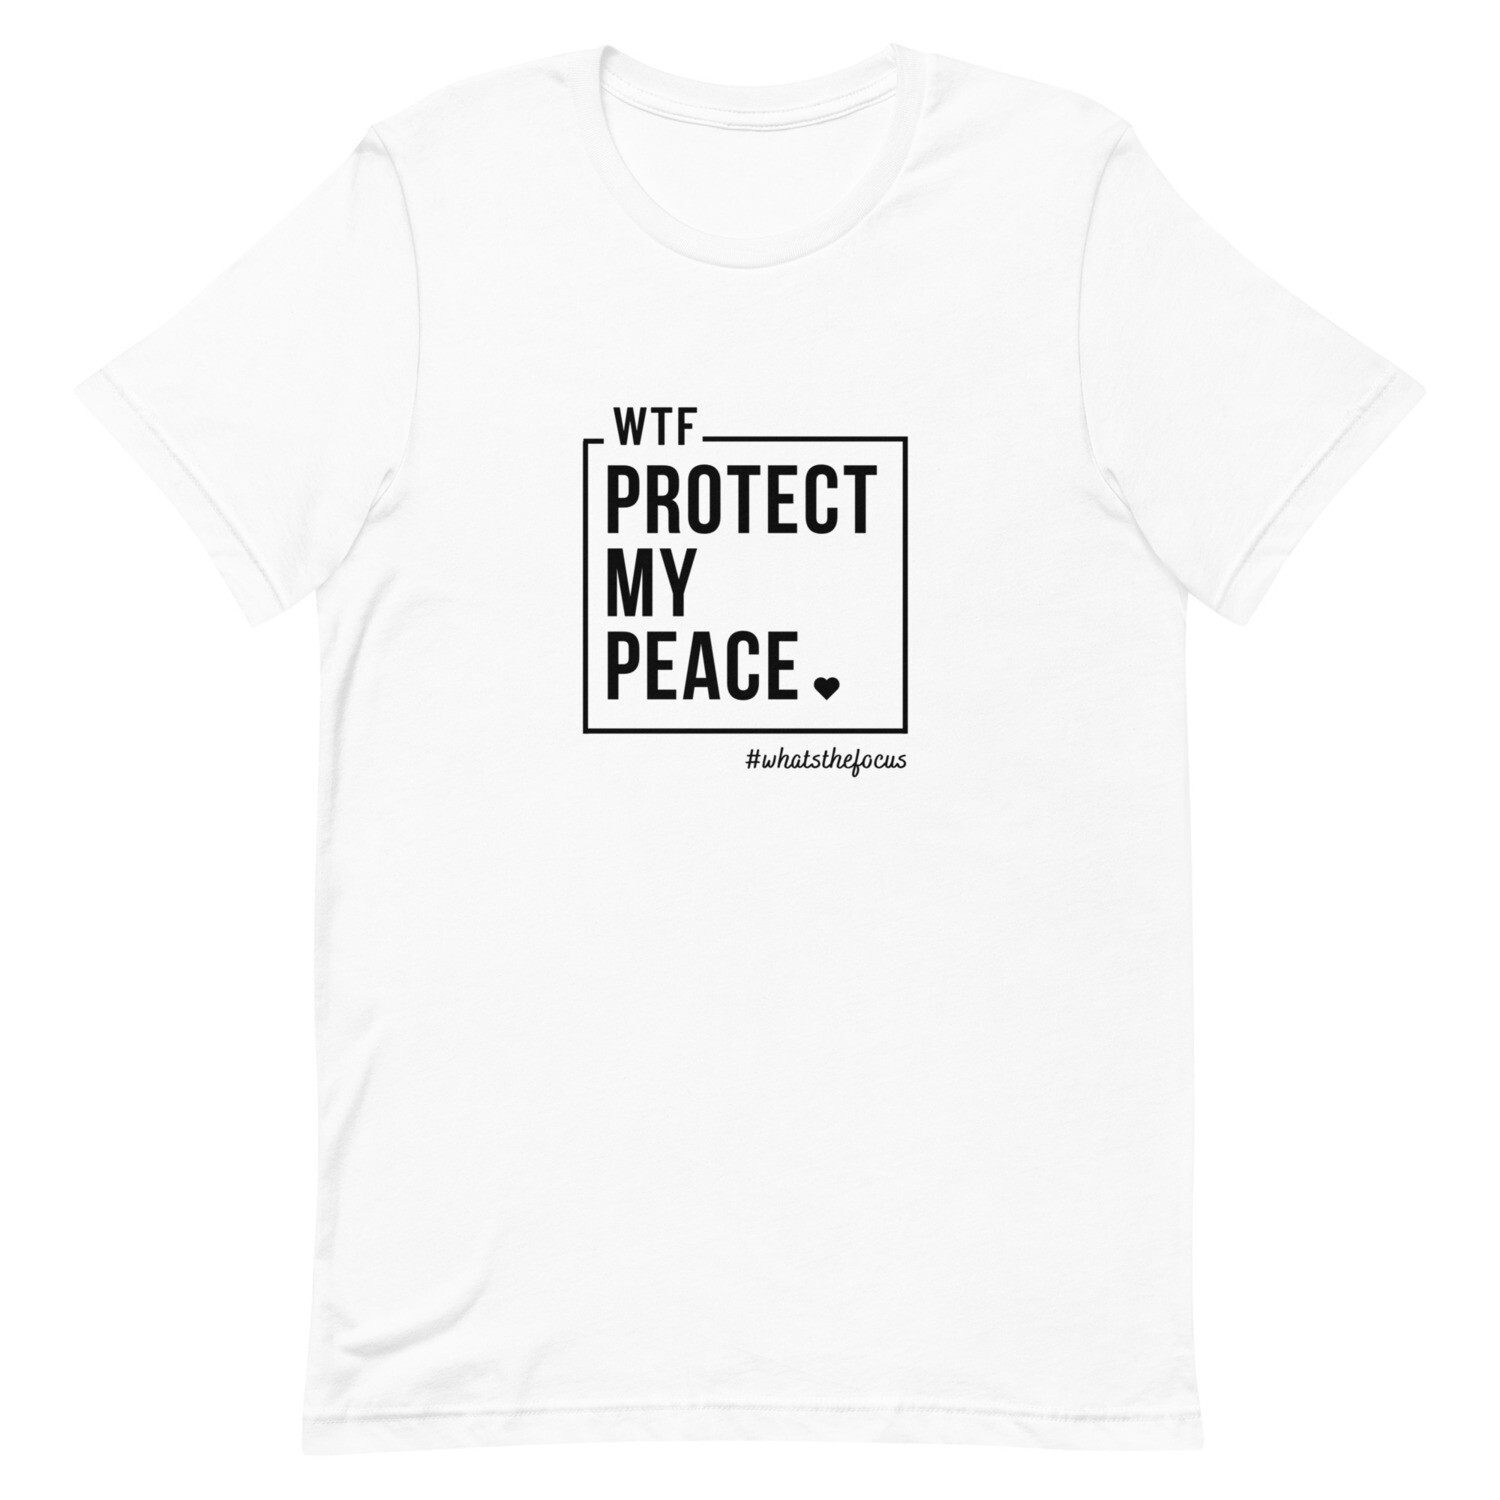 Protect My Peace - White Unisex Tee